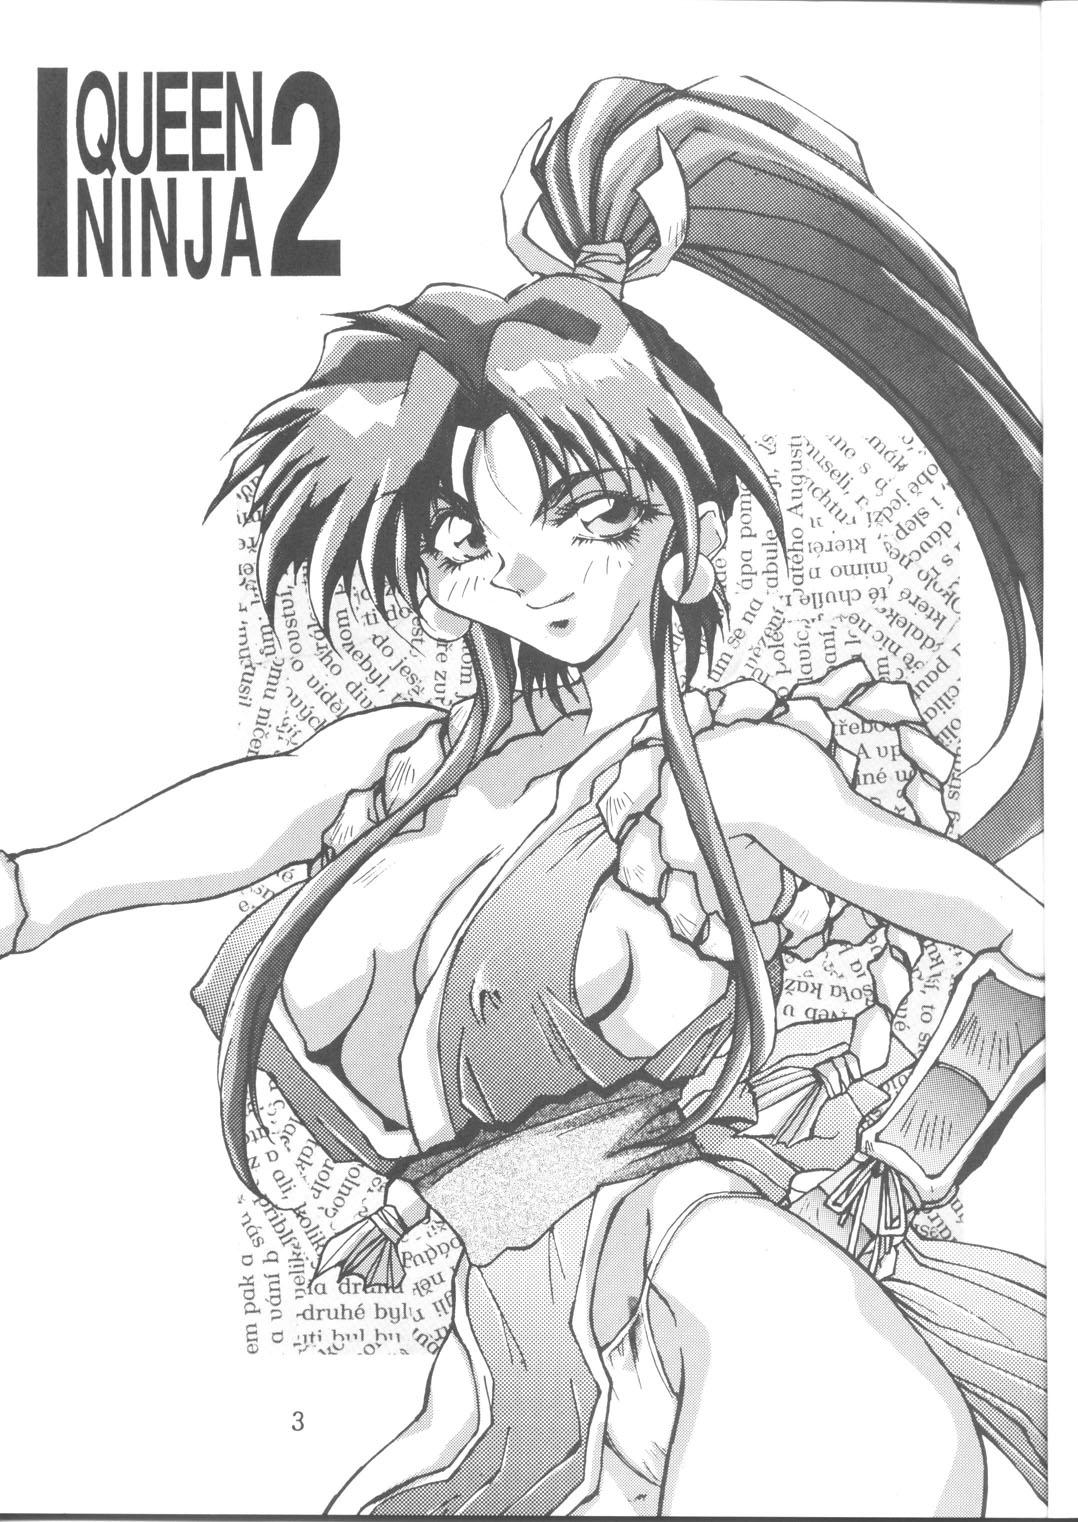 Ameture Porn Queen Ninja 2 - King of fighters Tattoos - Page 2